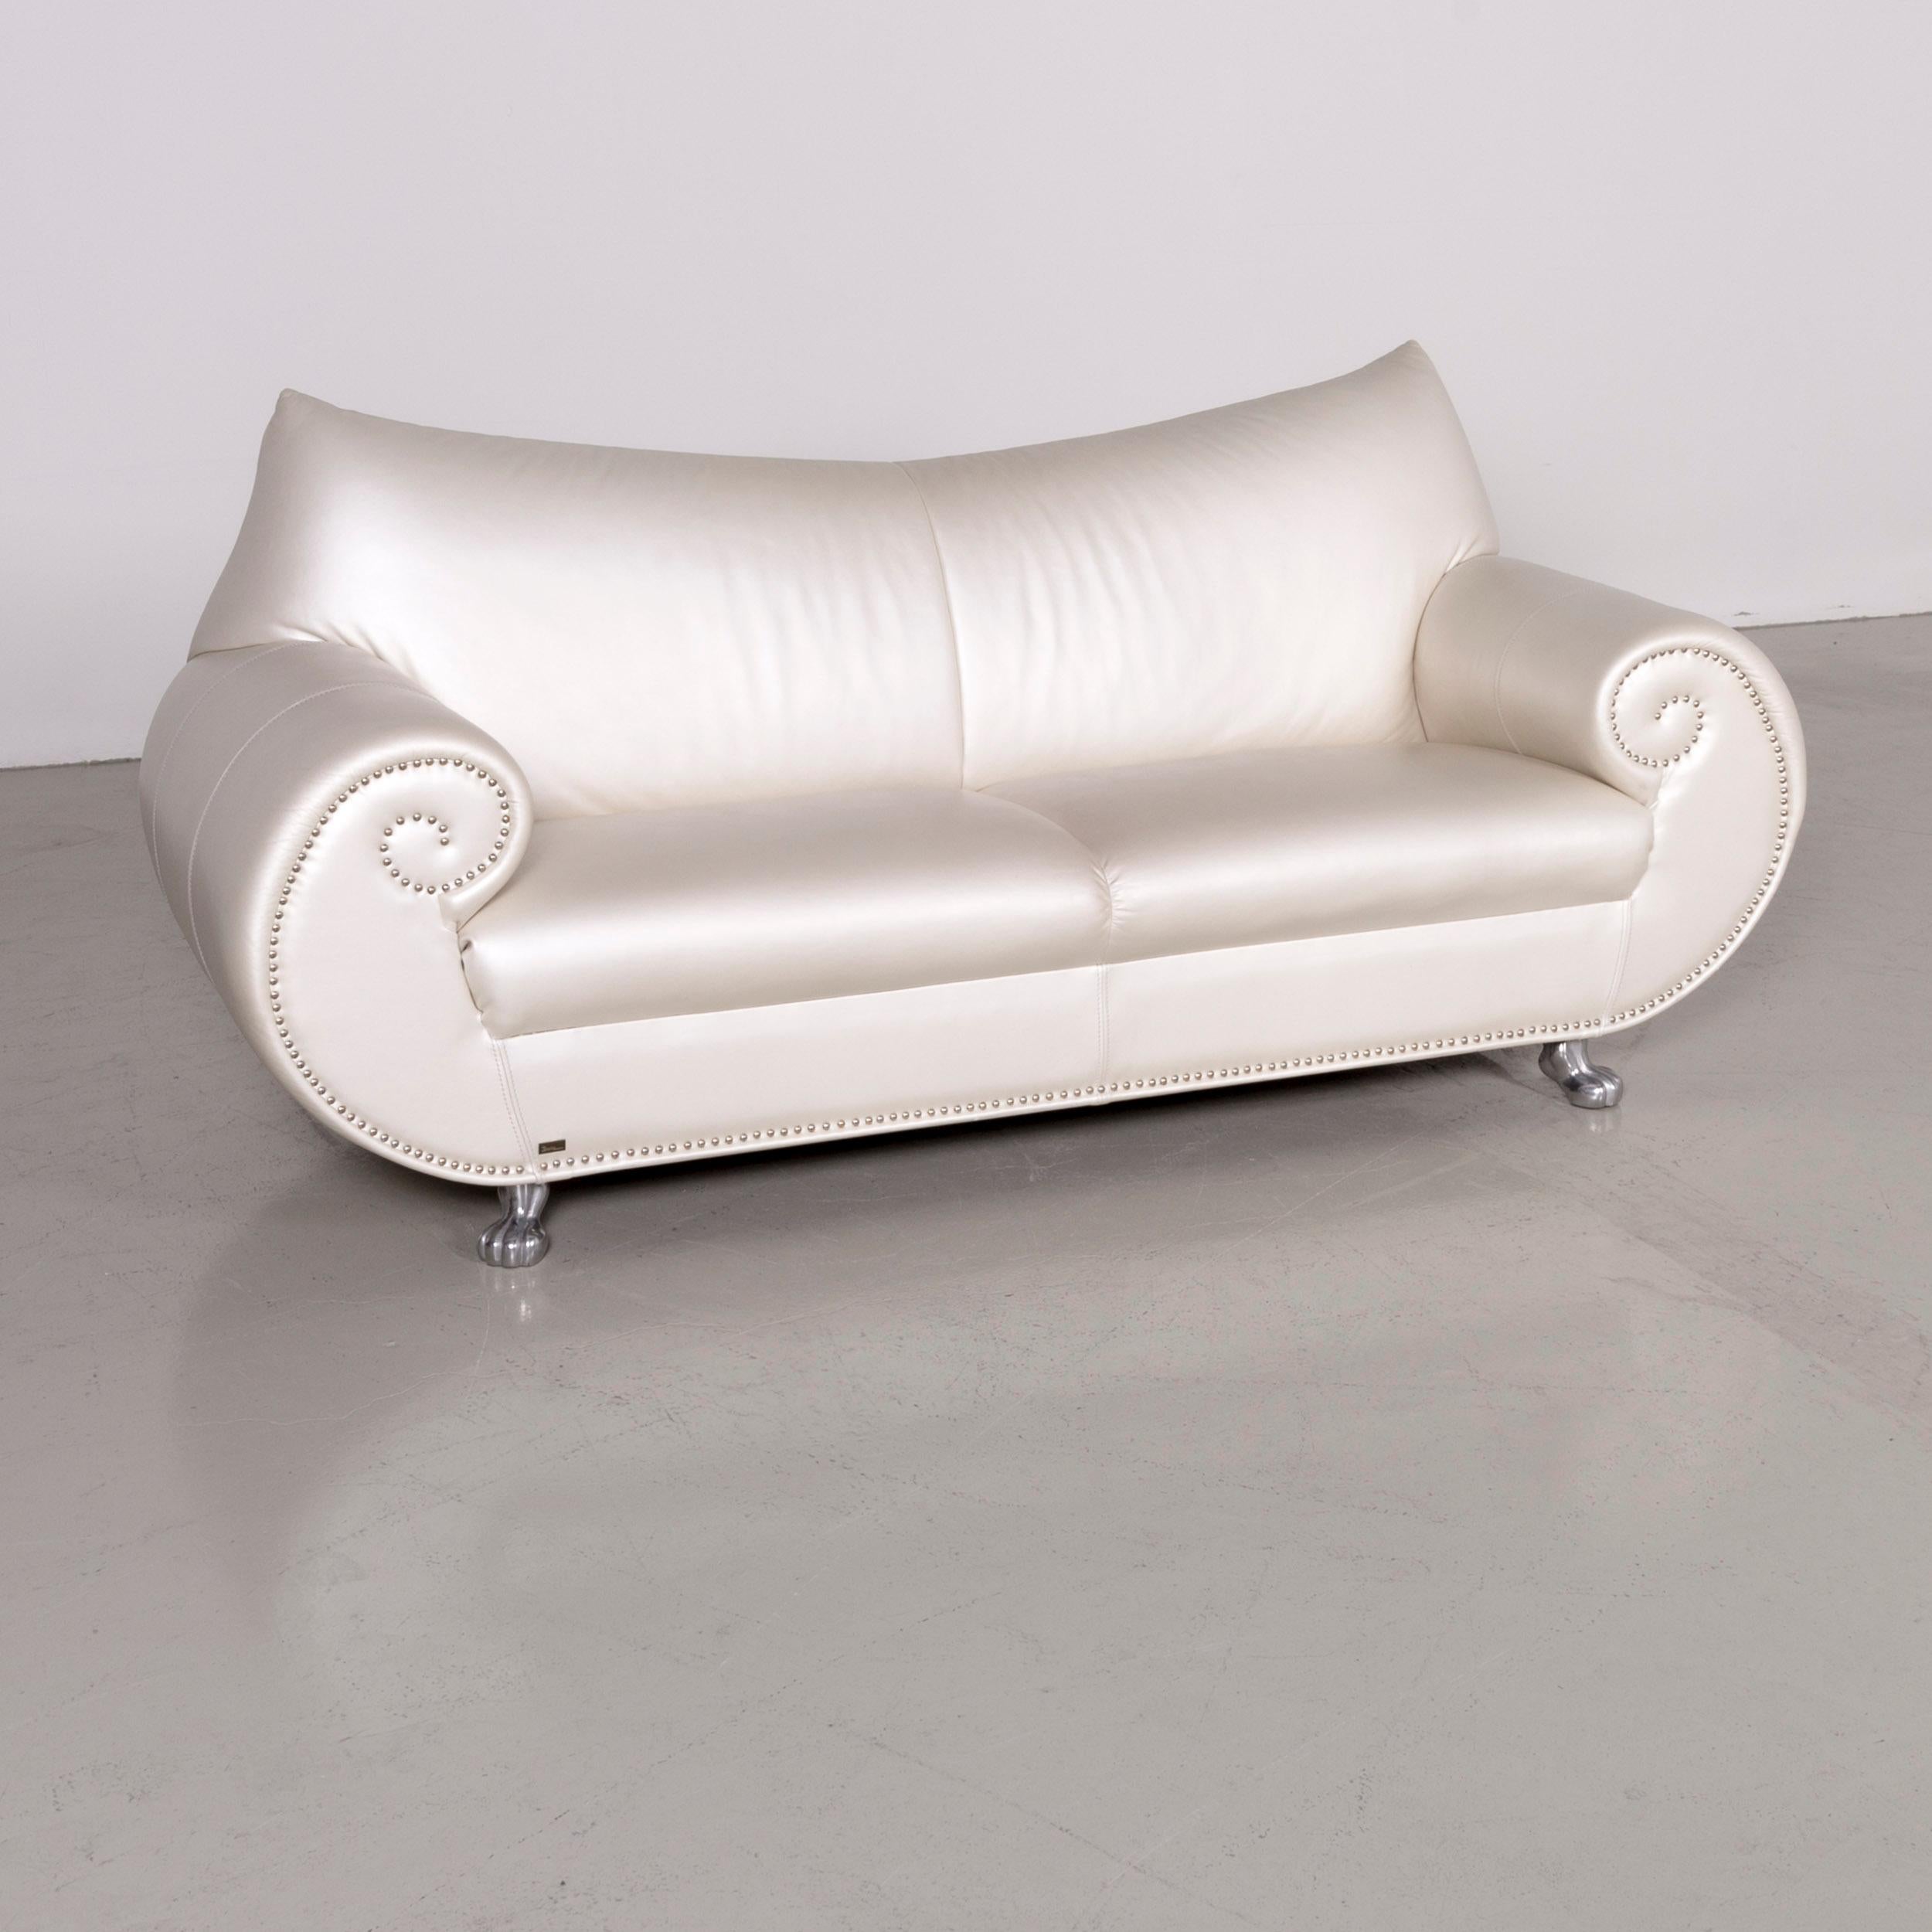 Bretz Gaudi Designer Leather Sofa Armchair Coffee Table Set White Two-Seat Couch In Good Condition For Sale In Cologne, DE